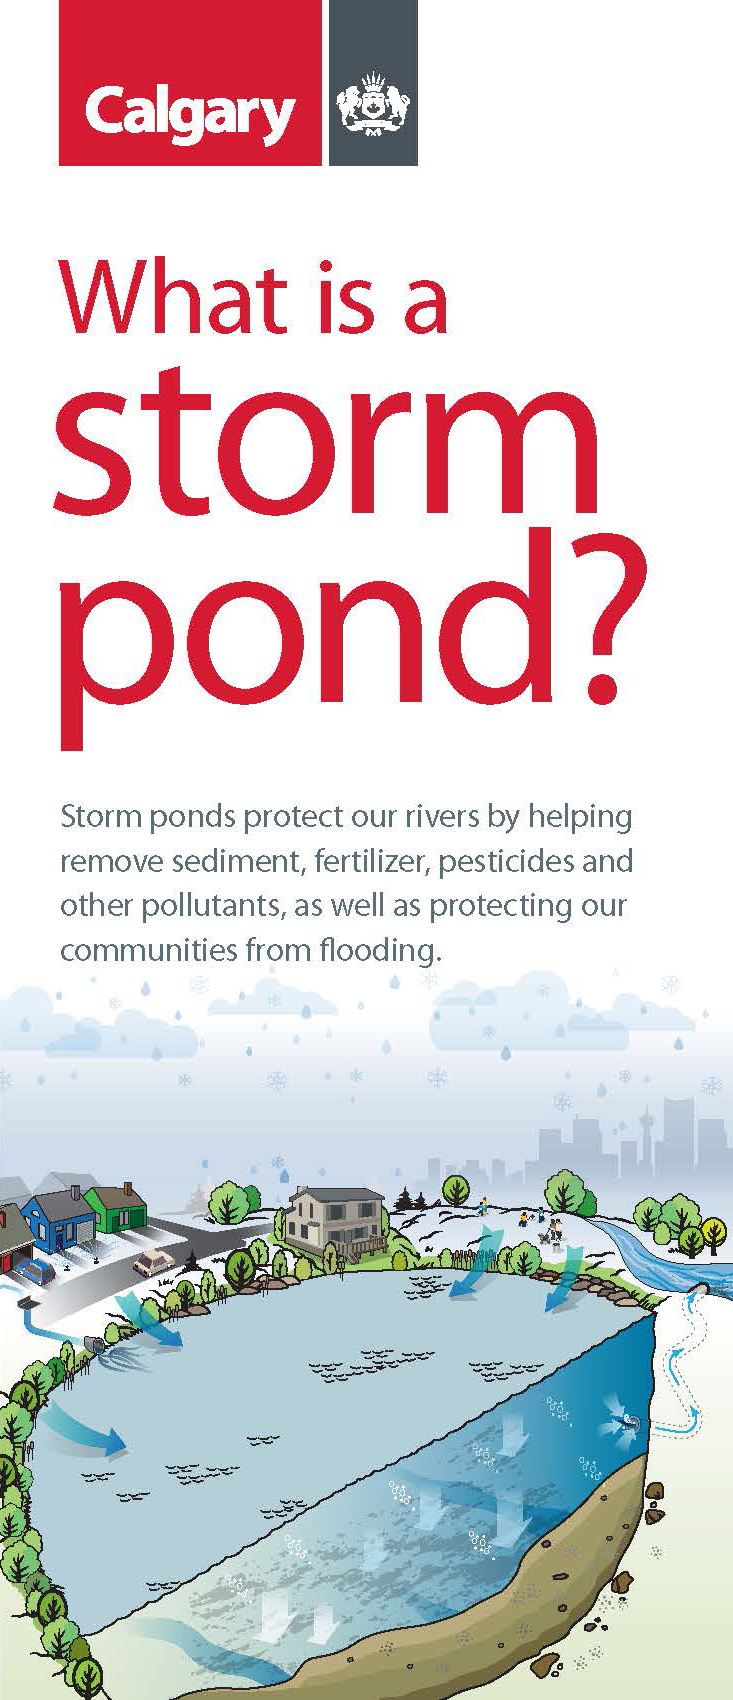 What is a storm pond?